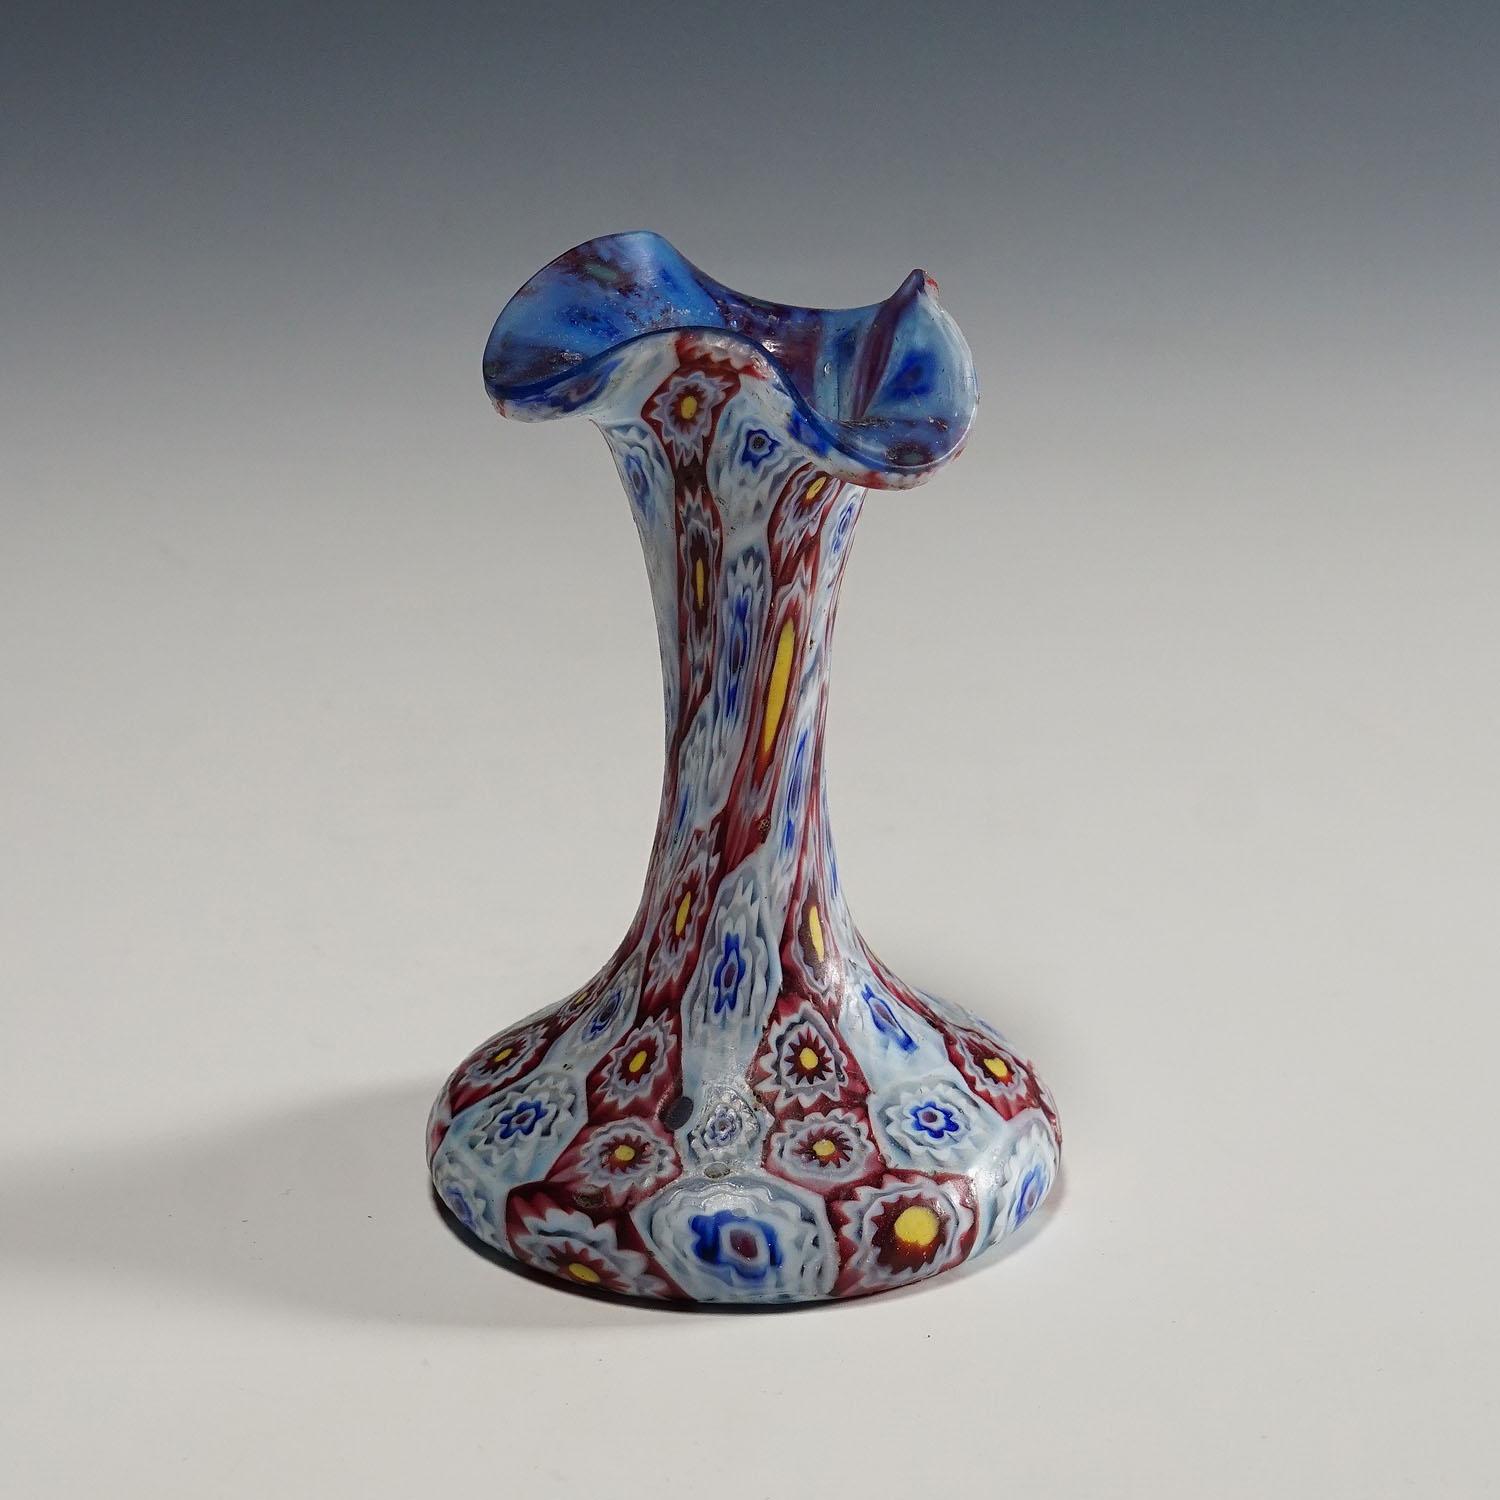 Small Millefiori vase in blue, red and white, Fratelli Toso Murano 1910.

A nice Millefiori murrine glass vase with undulating rim. Manufactured by Vetreria Fratelli Toso, Murano around 1910. Transparent blue glass with melted polychrome murrines in